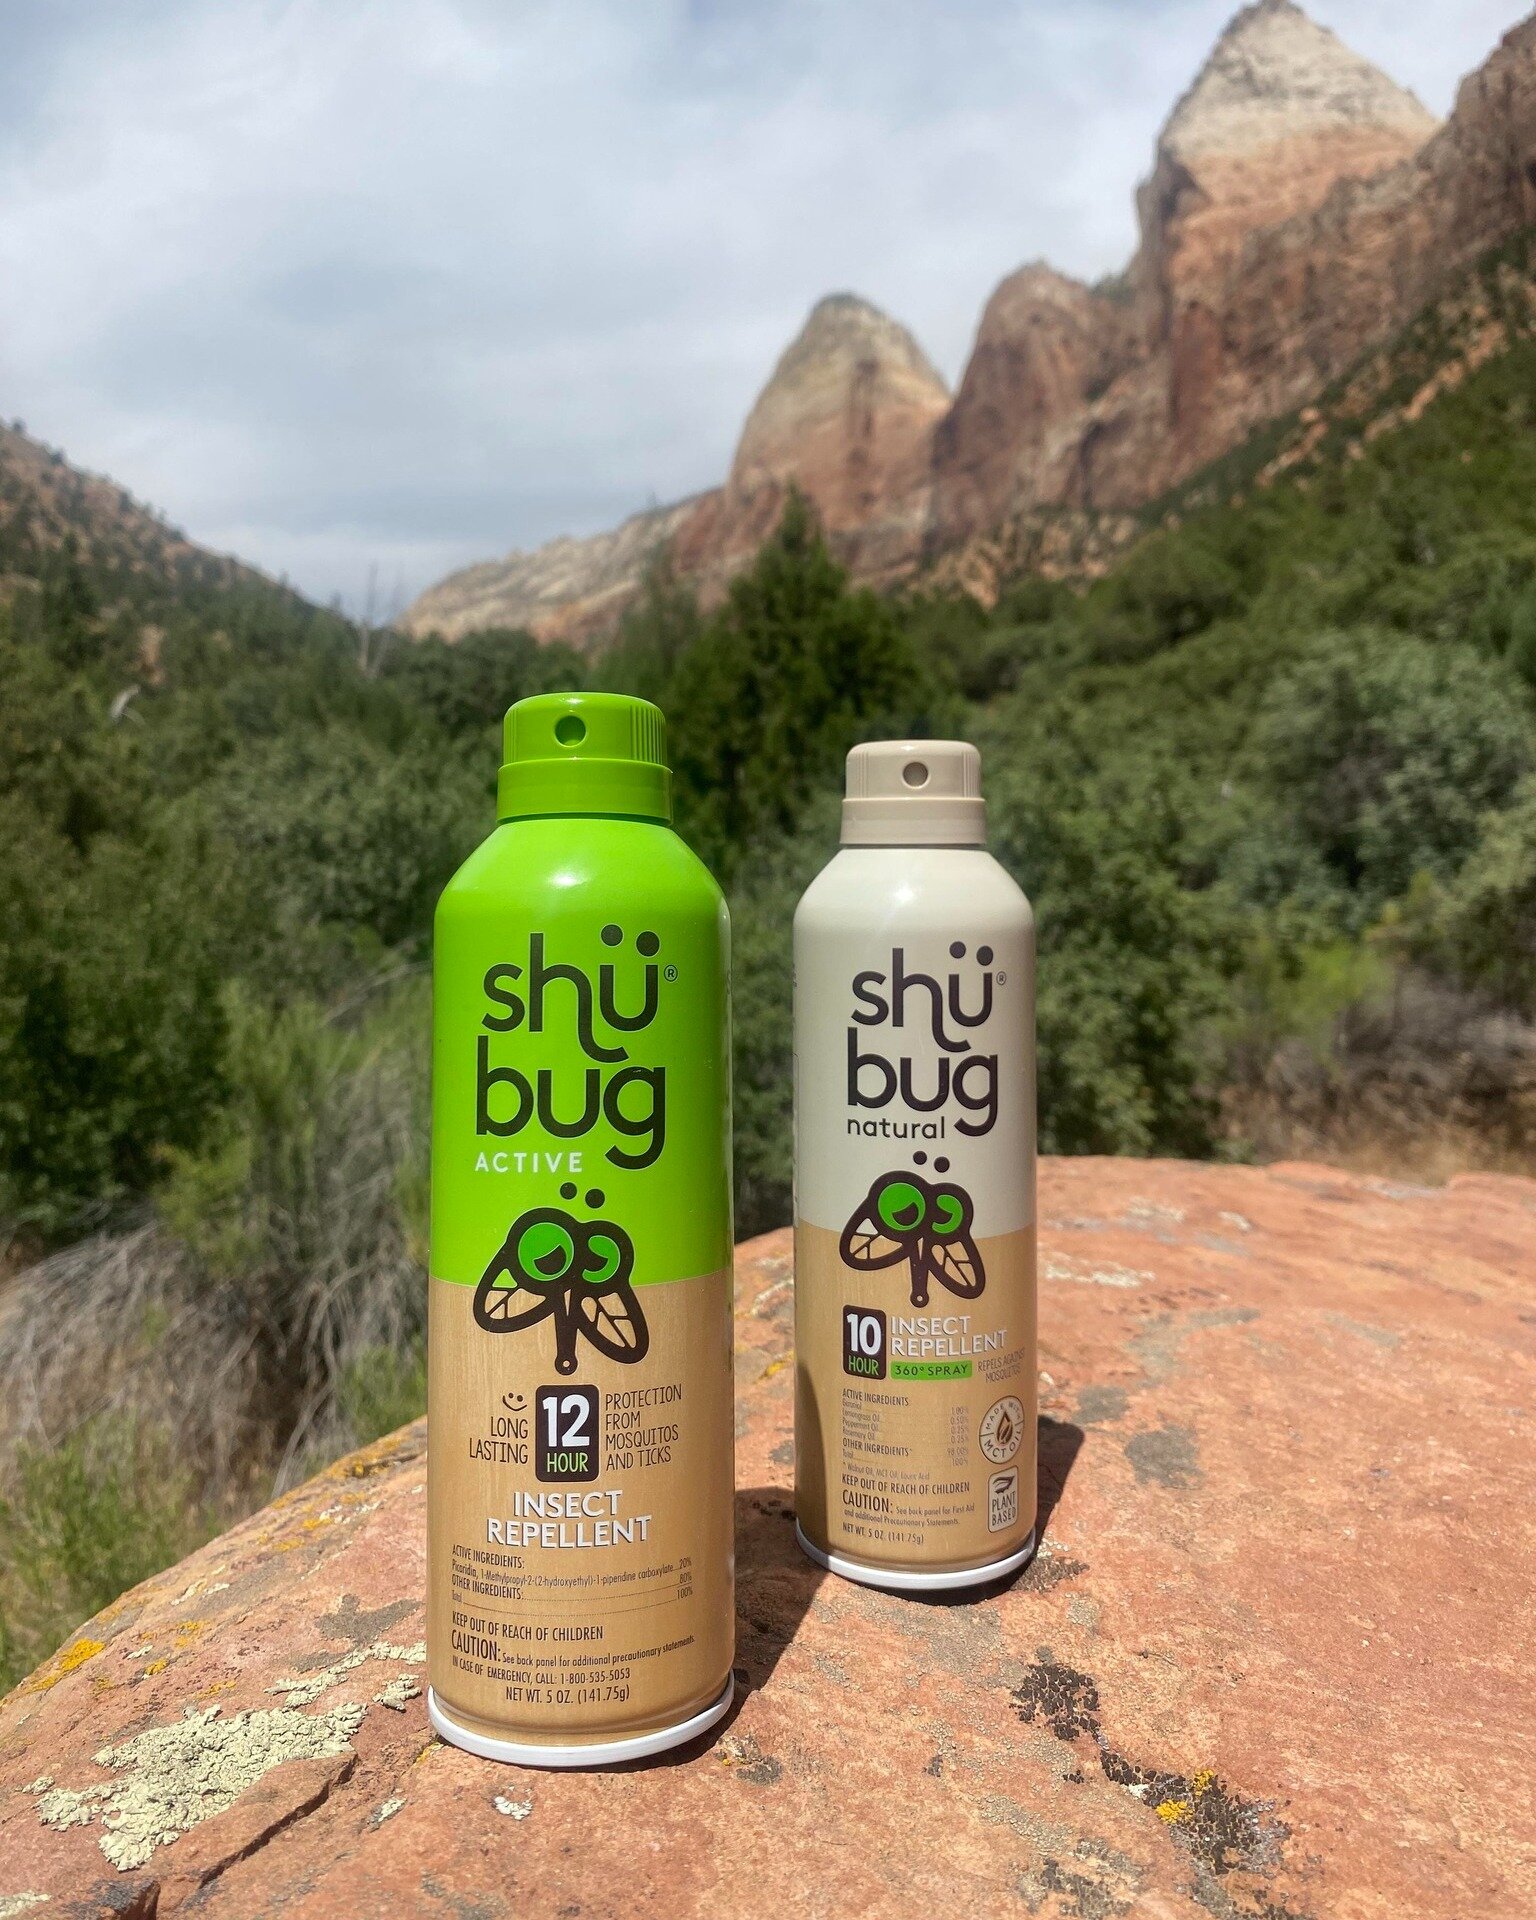 No matter what adventure you find yourself on this summer, Sh&uuml;bug has you covered! Enjoy the outdoors without the bugs. Available now in Walmart stores and walmart.com. 

#sh&uuml;bug #bugspray #outdoors #allnatural #SadBugsHappyYou #TeamSh&uuml